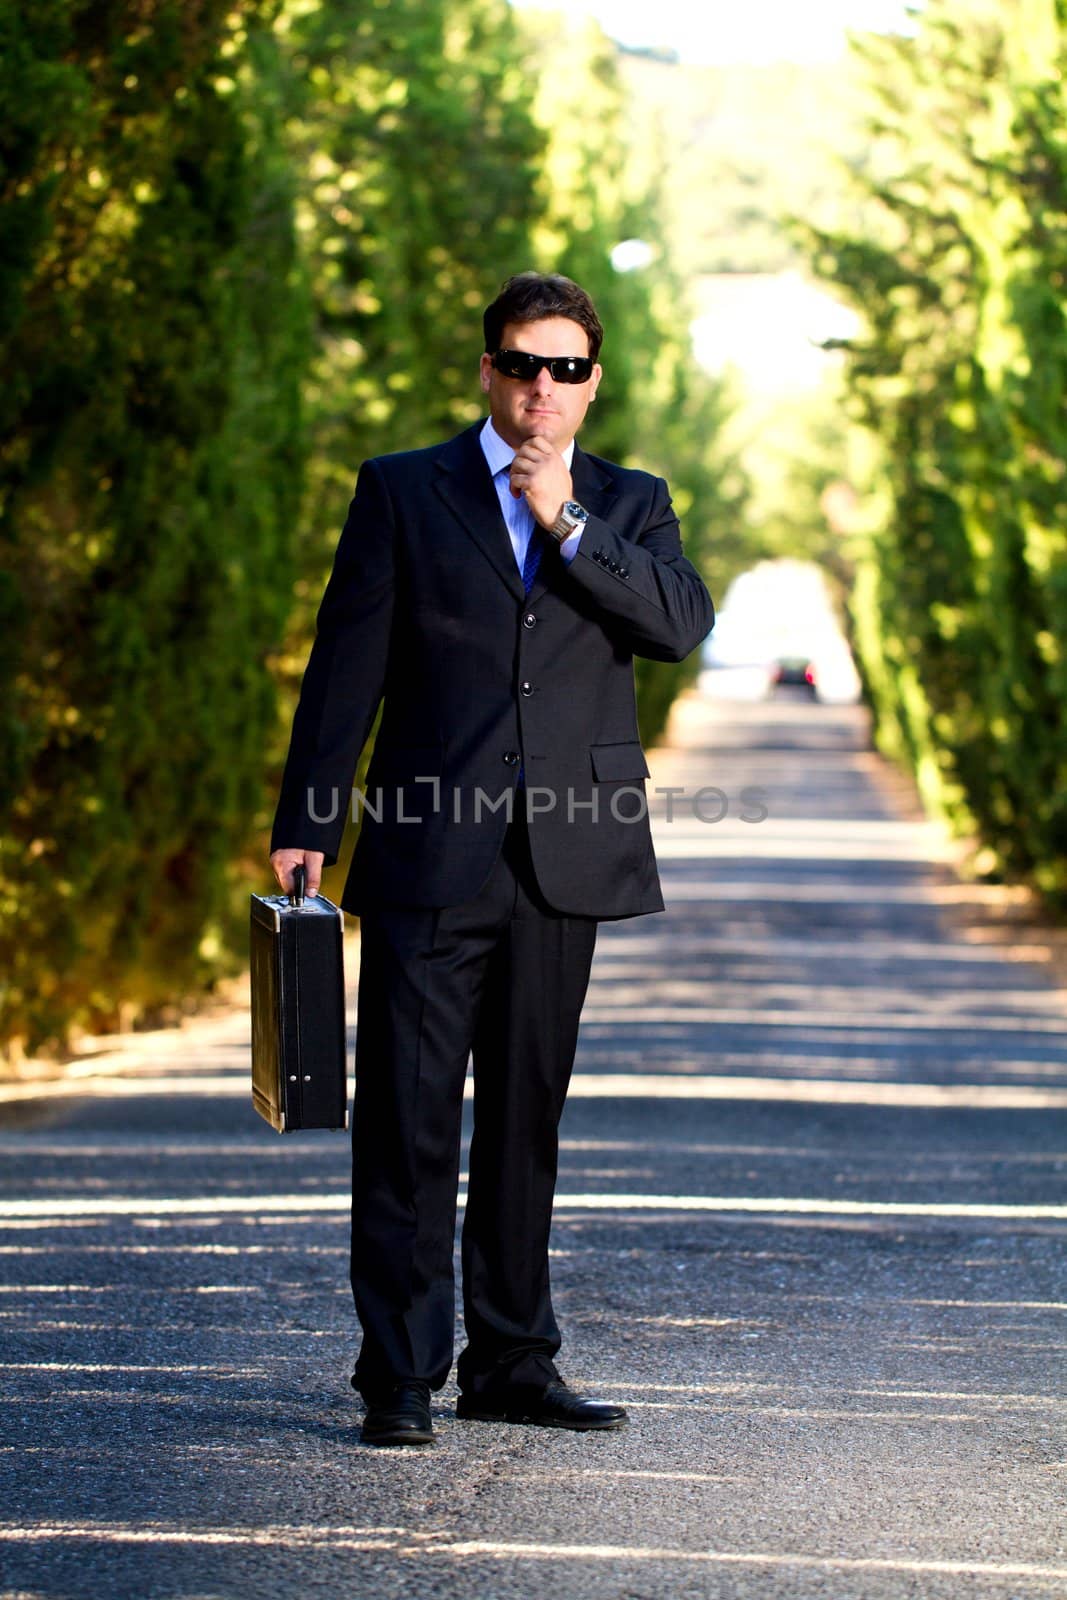 View of a young male business man on a asphalt road.